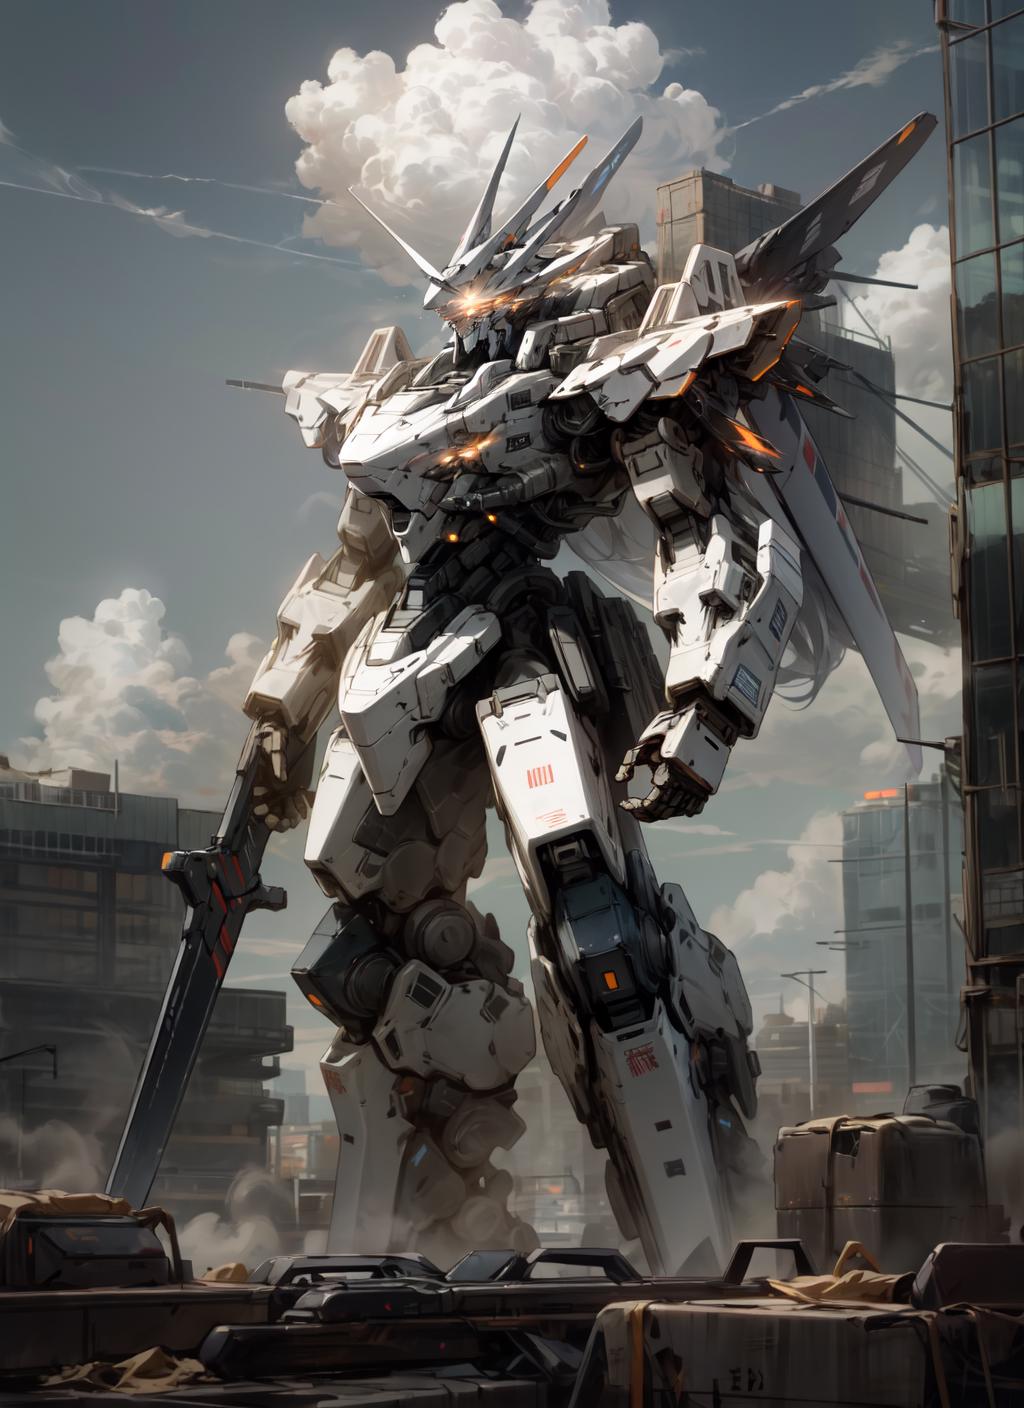 A large robot or mech stands in a cityscape, holding a sword.